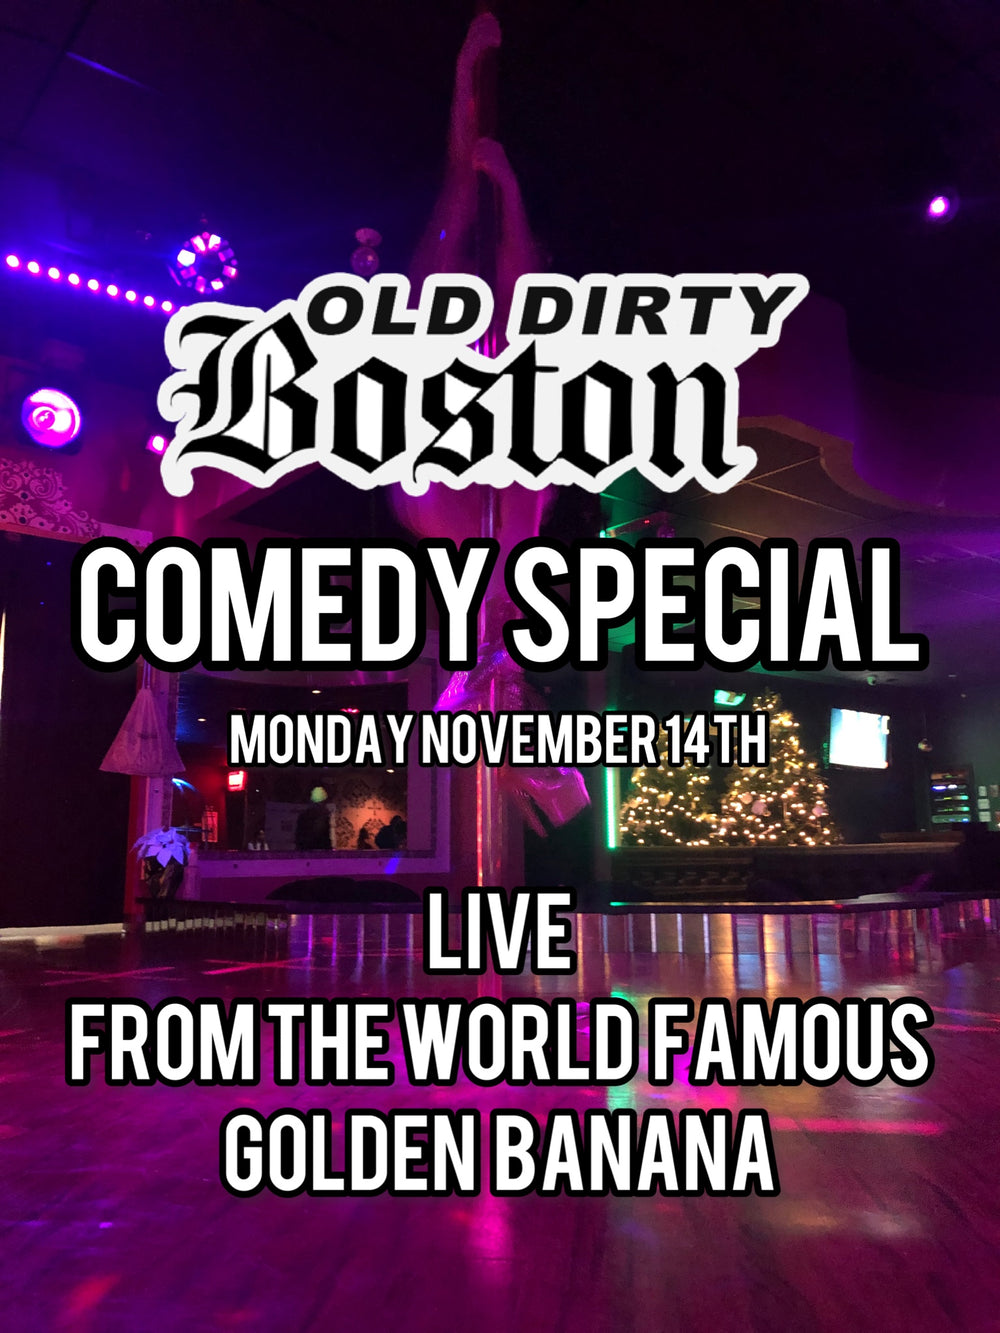 Old Dirty Boston Comedy Special Live from the World Famous Golden Banana